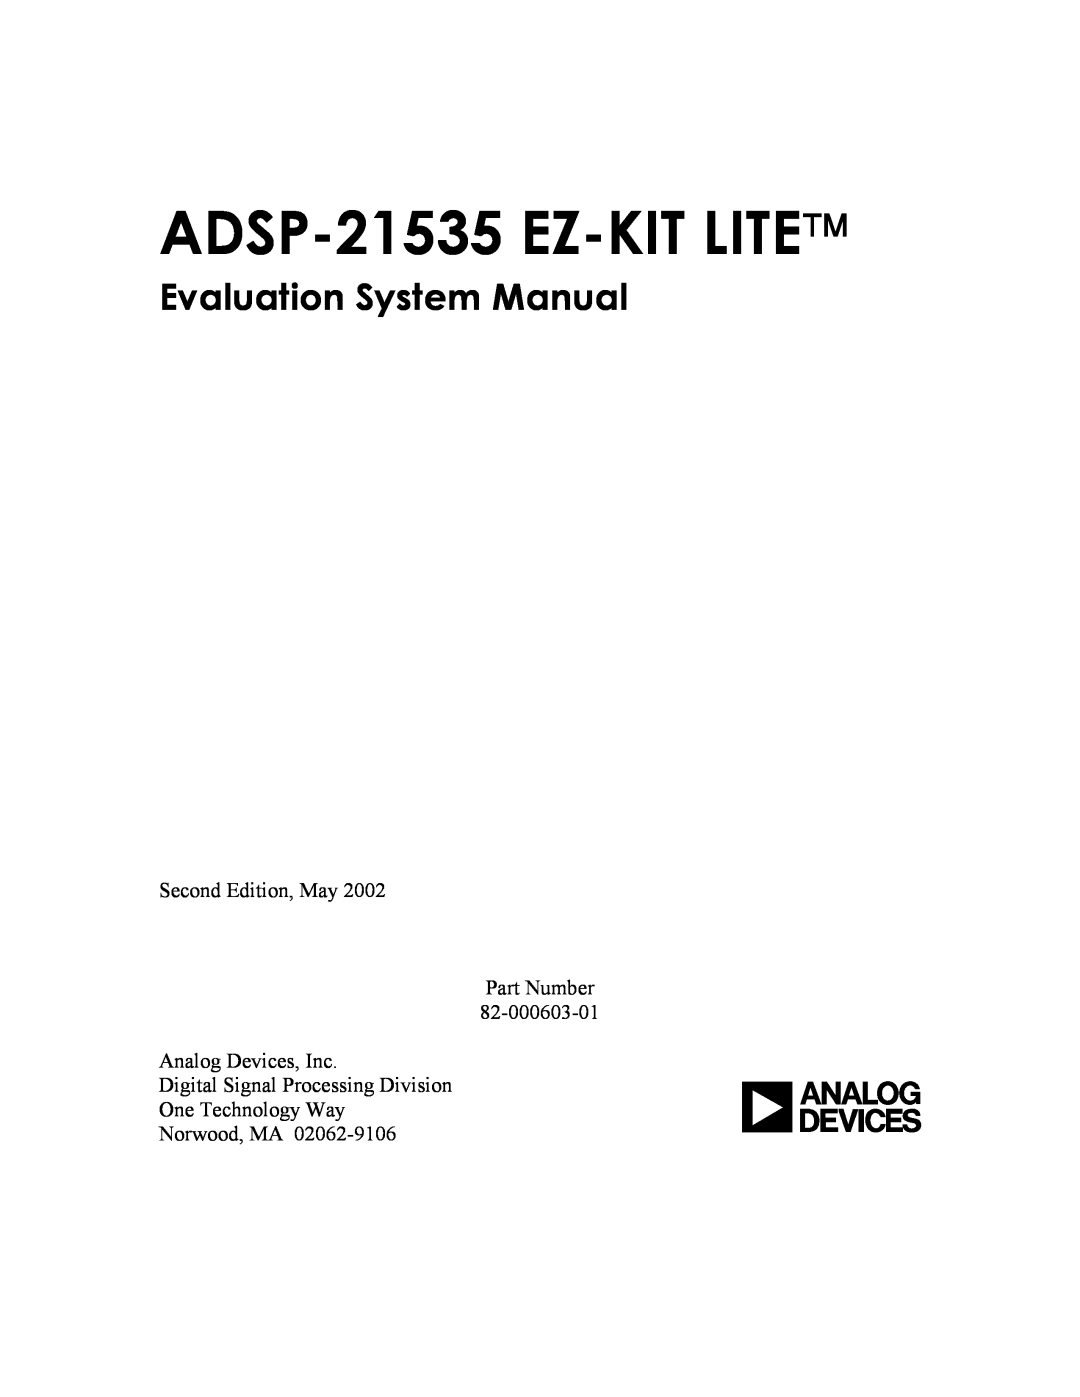 Analog Devices ADSP-21535 E-KIT LITE, 82-0000603-01 system manual ADSP-21535 EZ-KIT LITE, Evaluation System Manual 